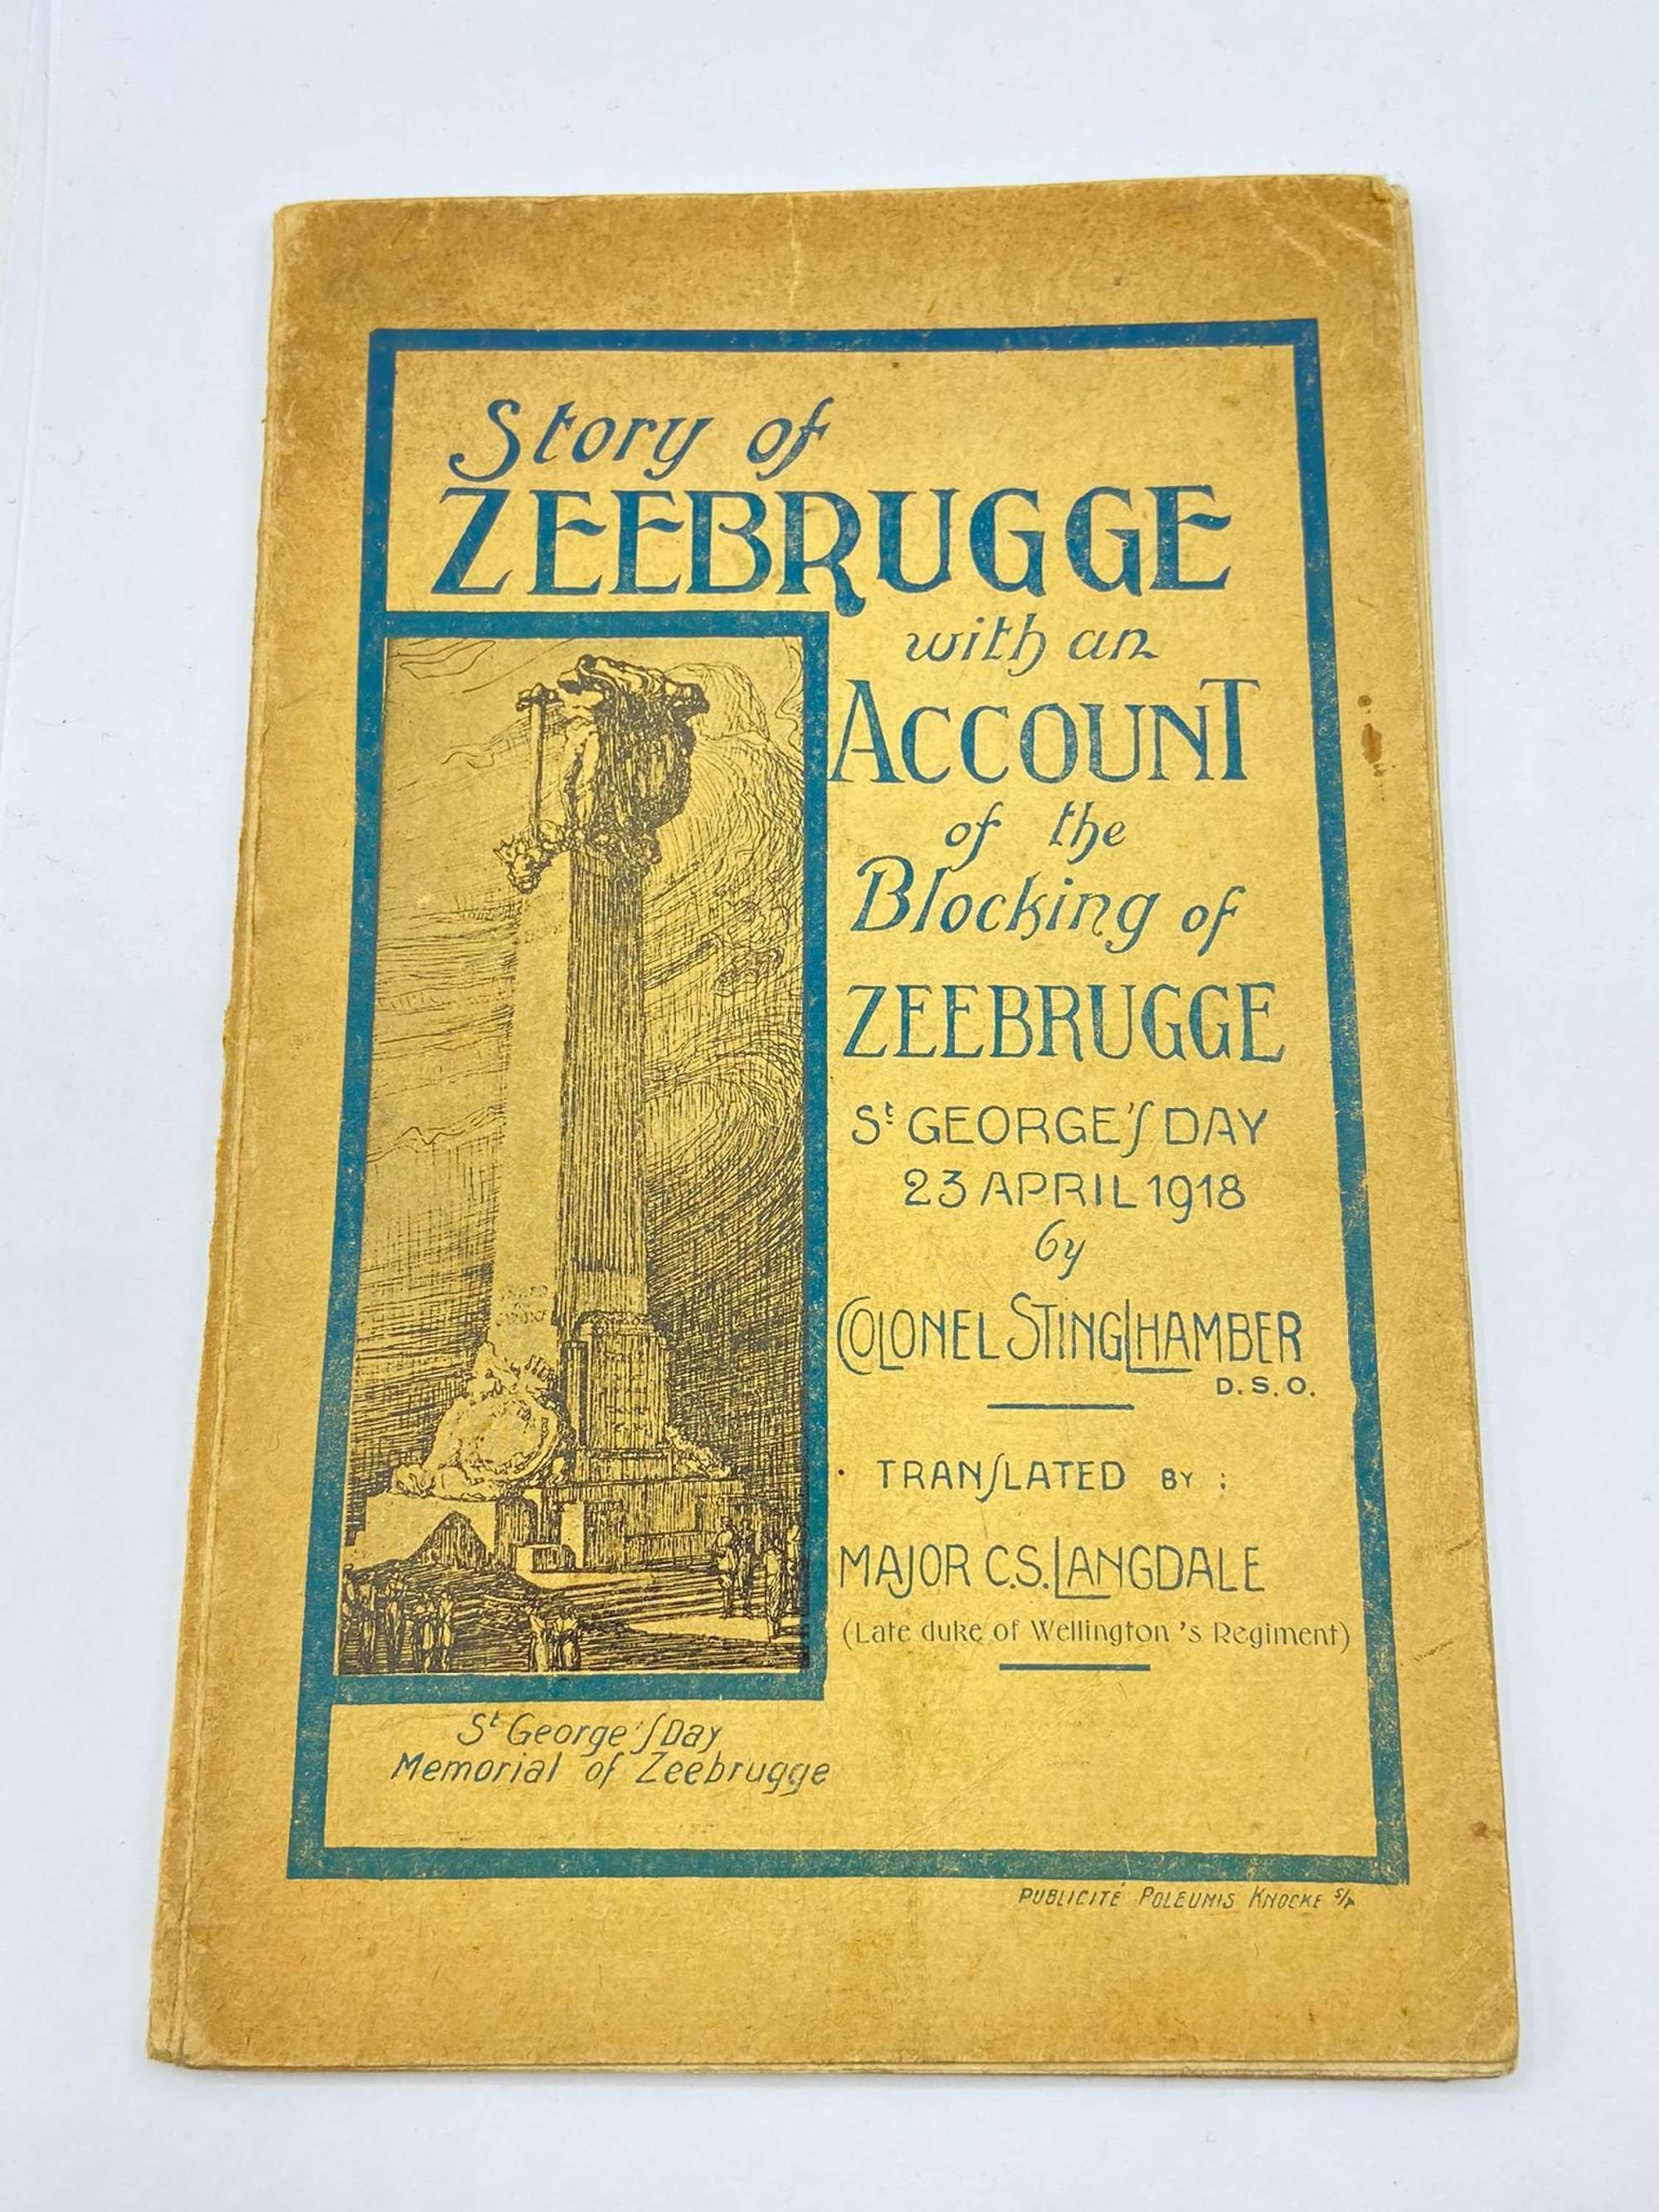 WW1 Story of Zeebrugge, with an account of the Blocking of Zeebrugge